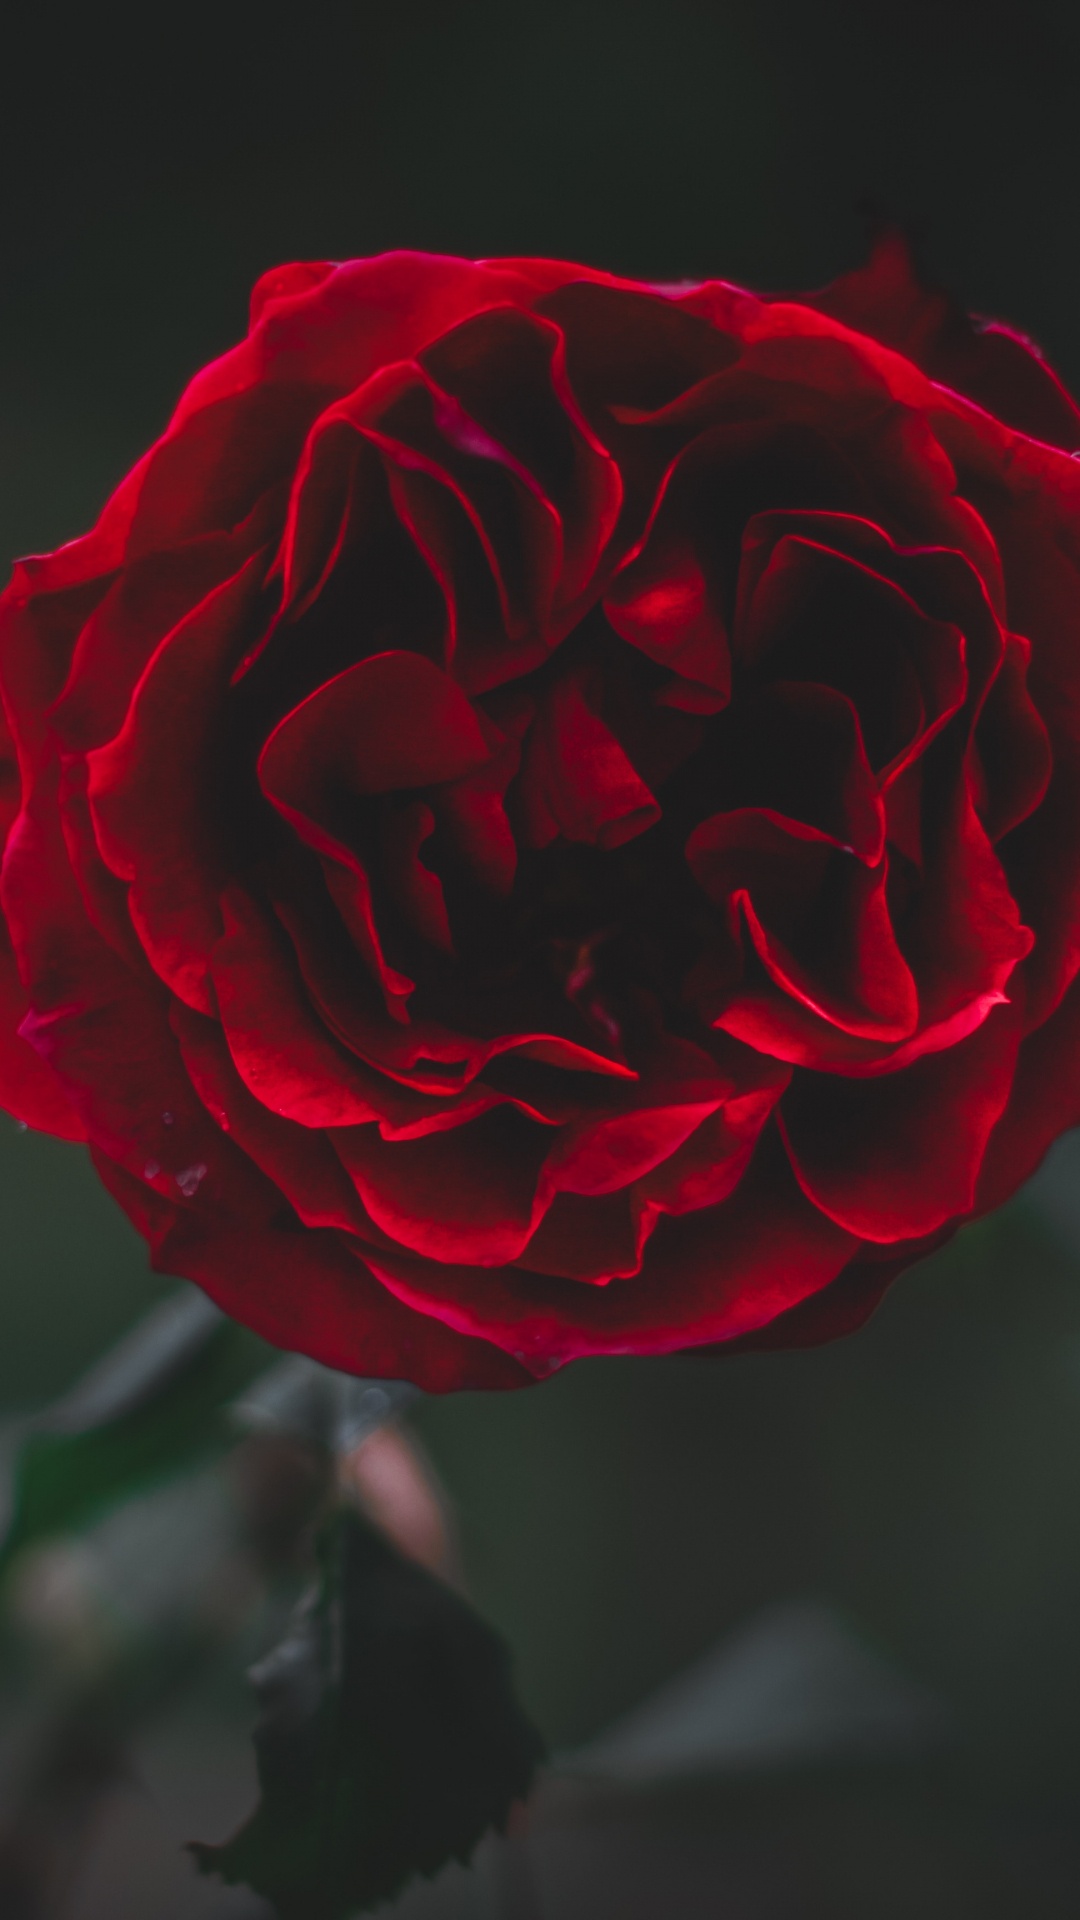 Red Rose in Bloom in Close up Photography. Wallpaper in 1080x1920 Resolution